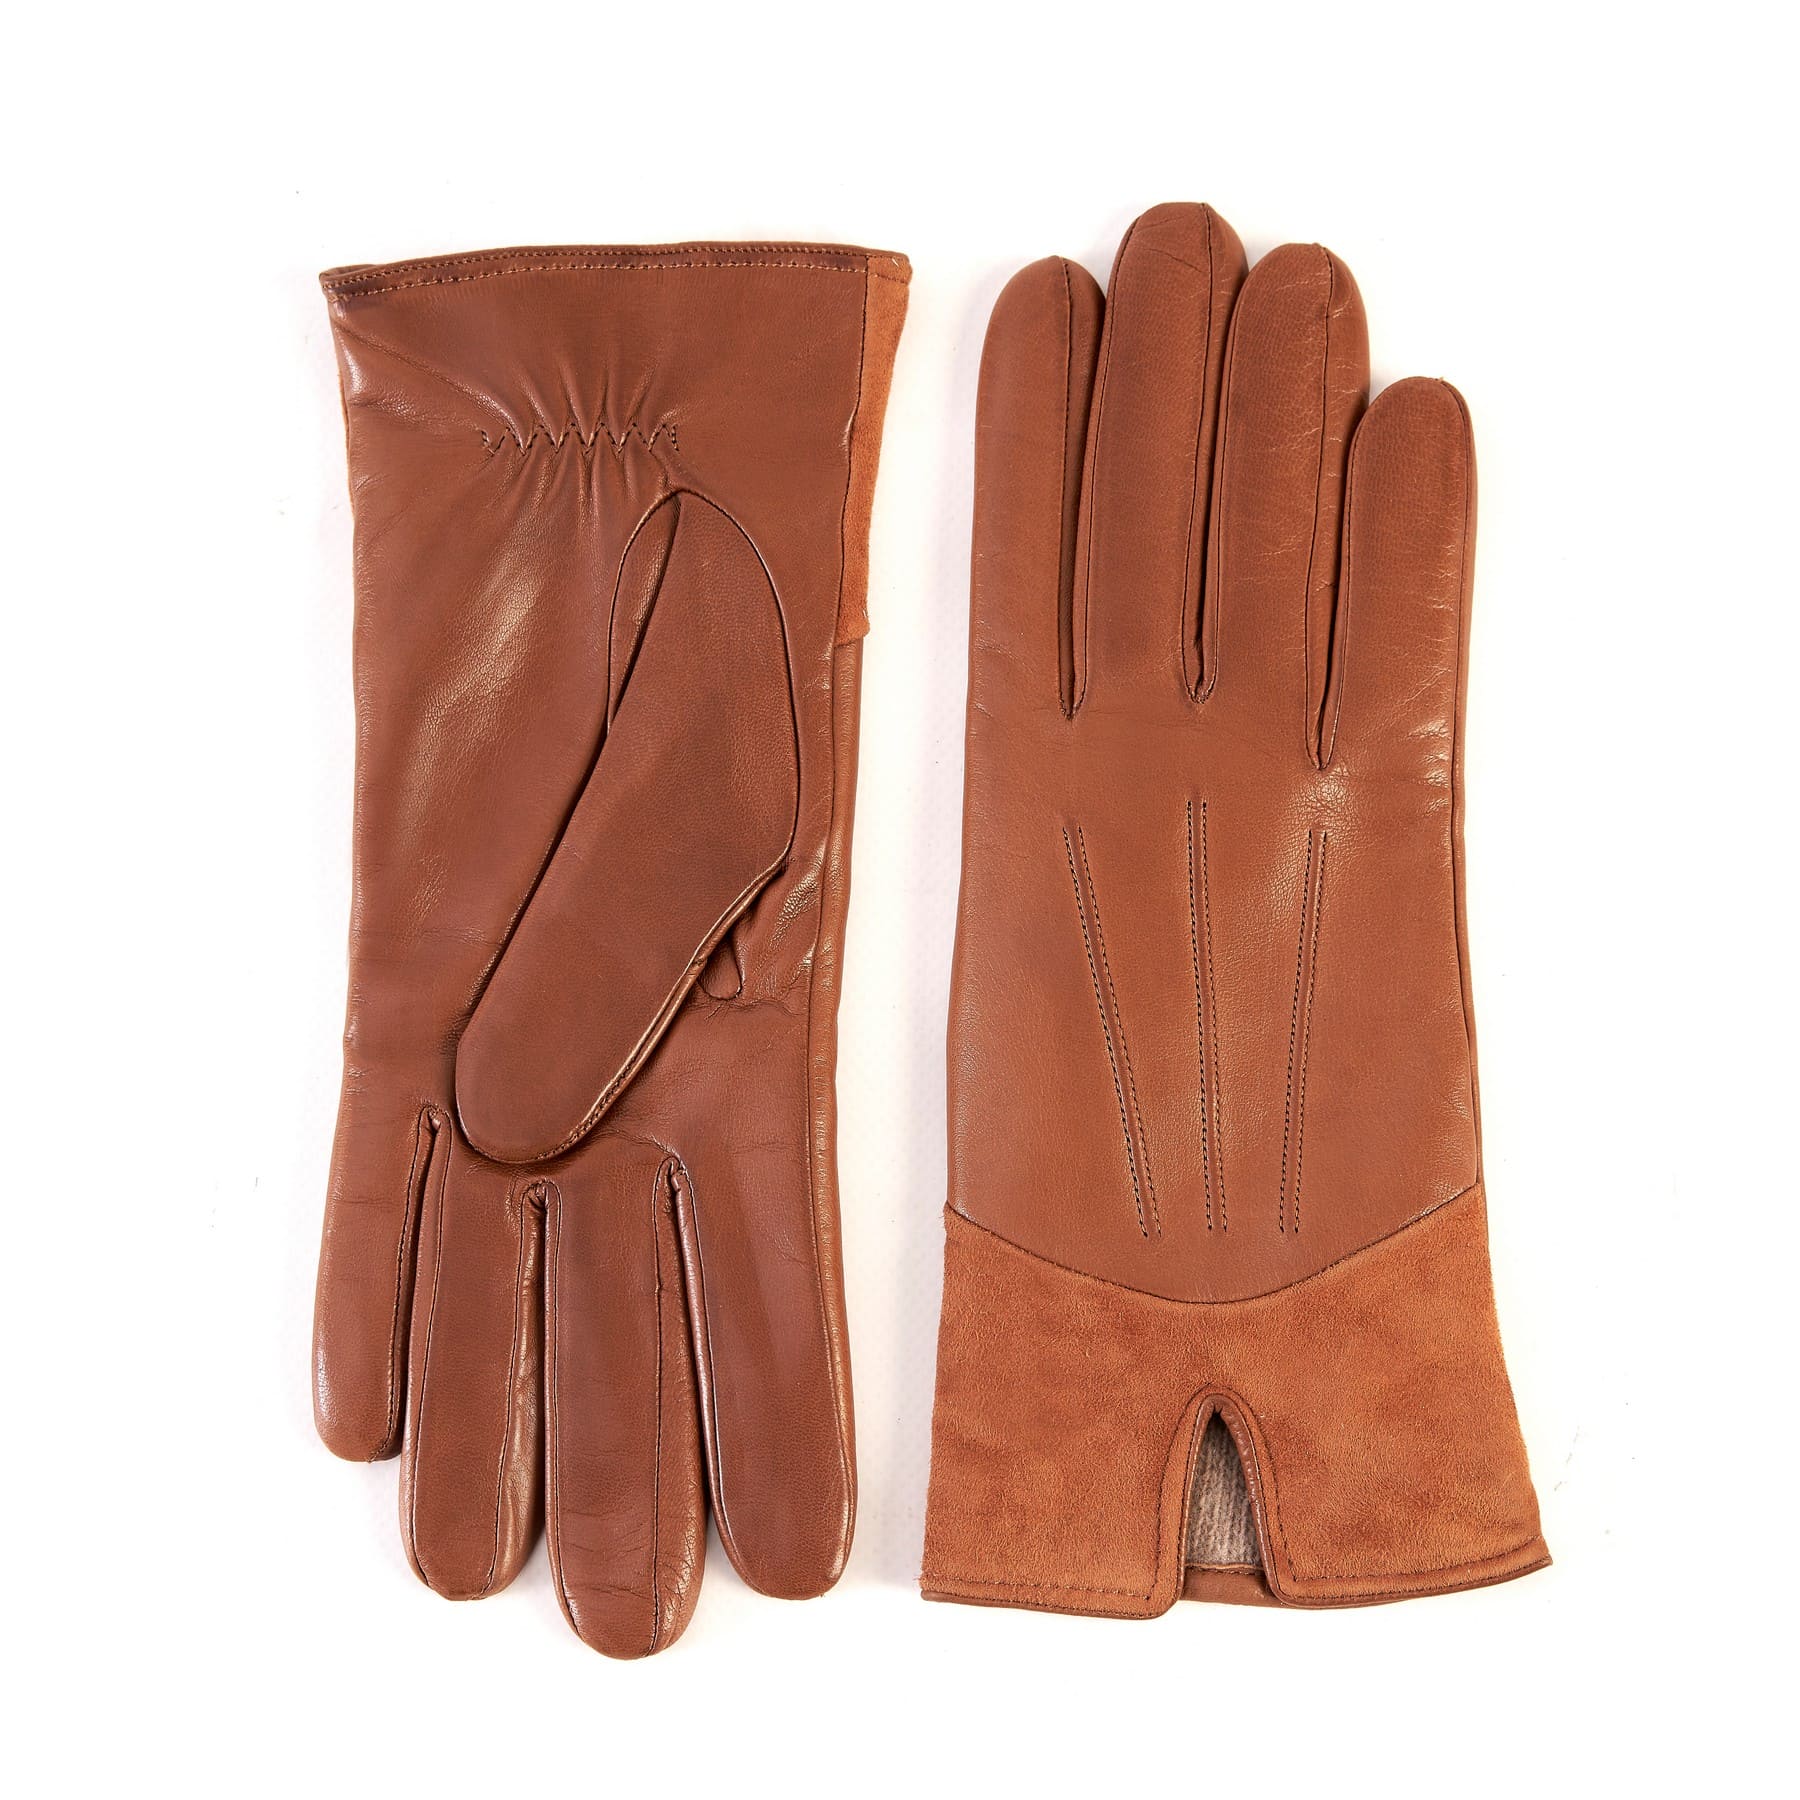 Women's camel nappa leather gloves with suede panel insert on top cashmere lined